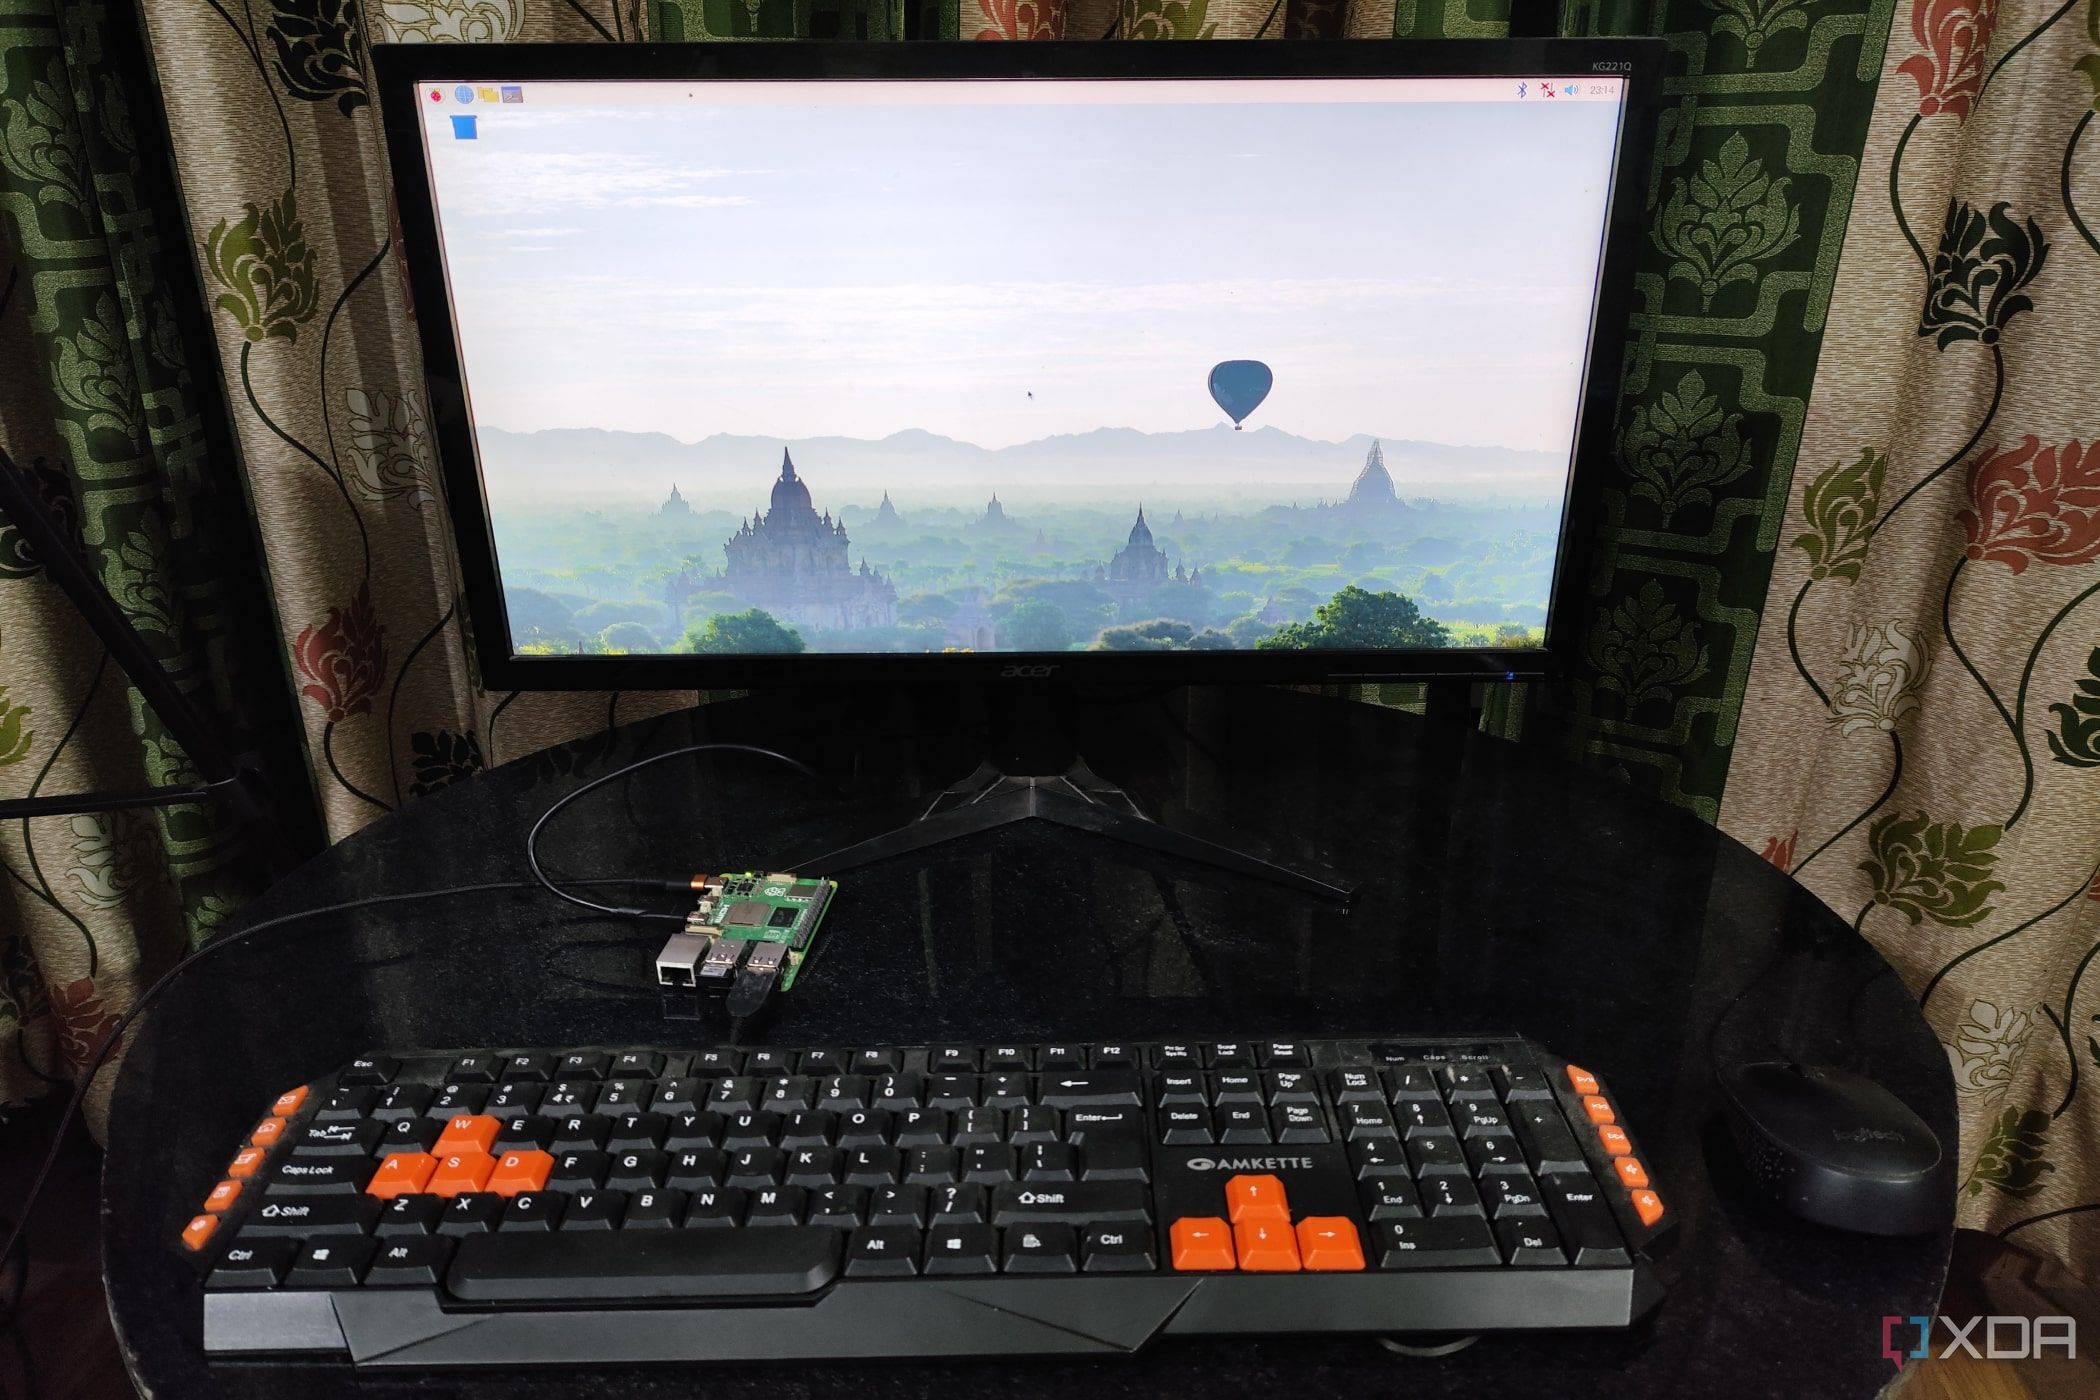 A Raspberry Pi 5 with a keyboard and mouse plugged in, with the monitor displaying the Raspberry Pi OS desktop